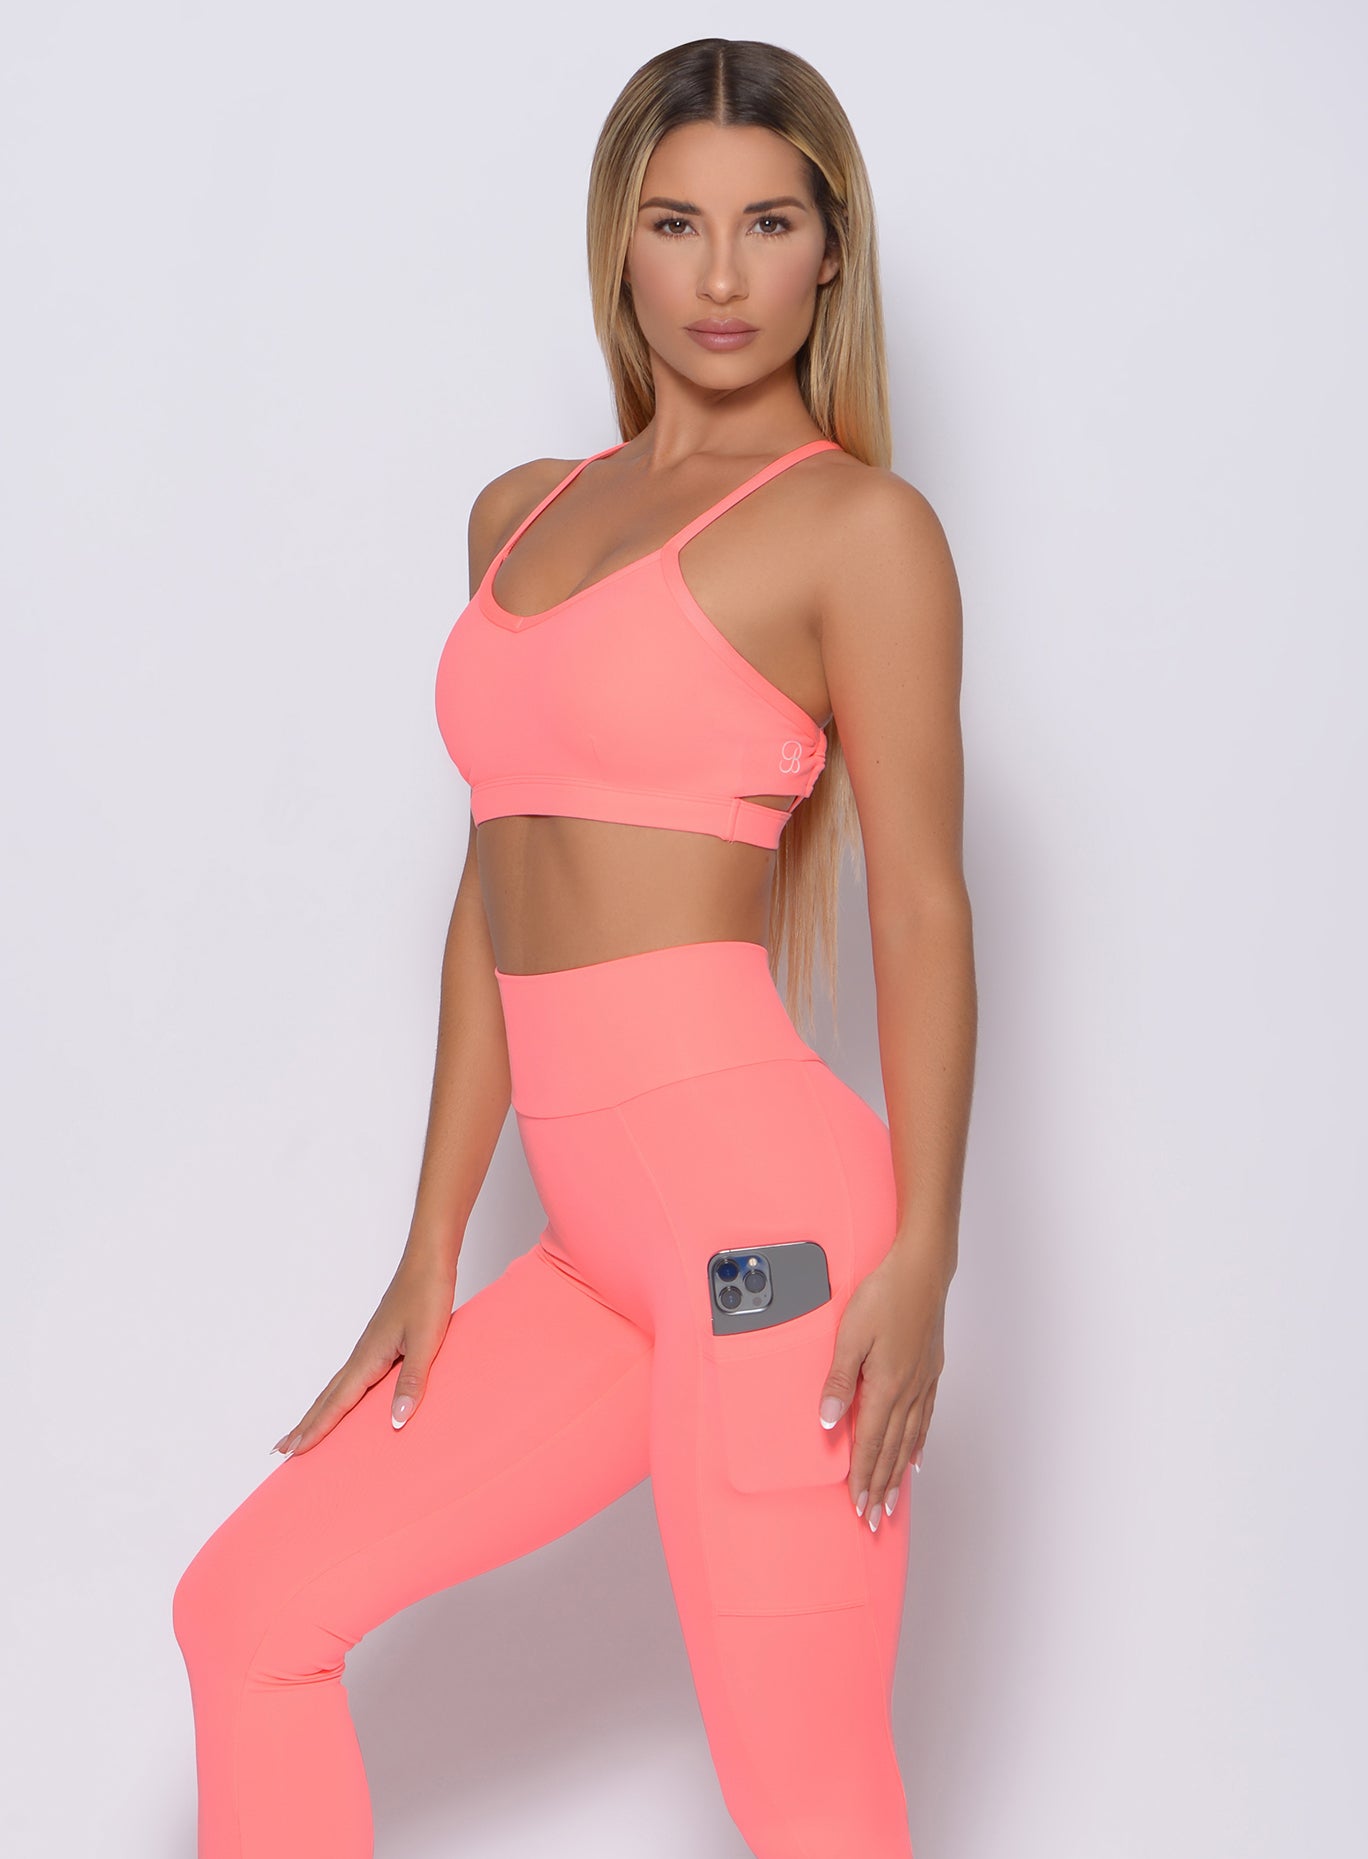 Left side view of the model wearing our pumped sports bra in wild peach color and a matching leggings